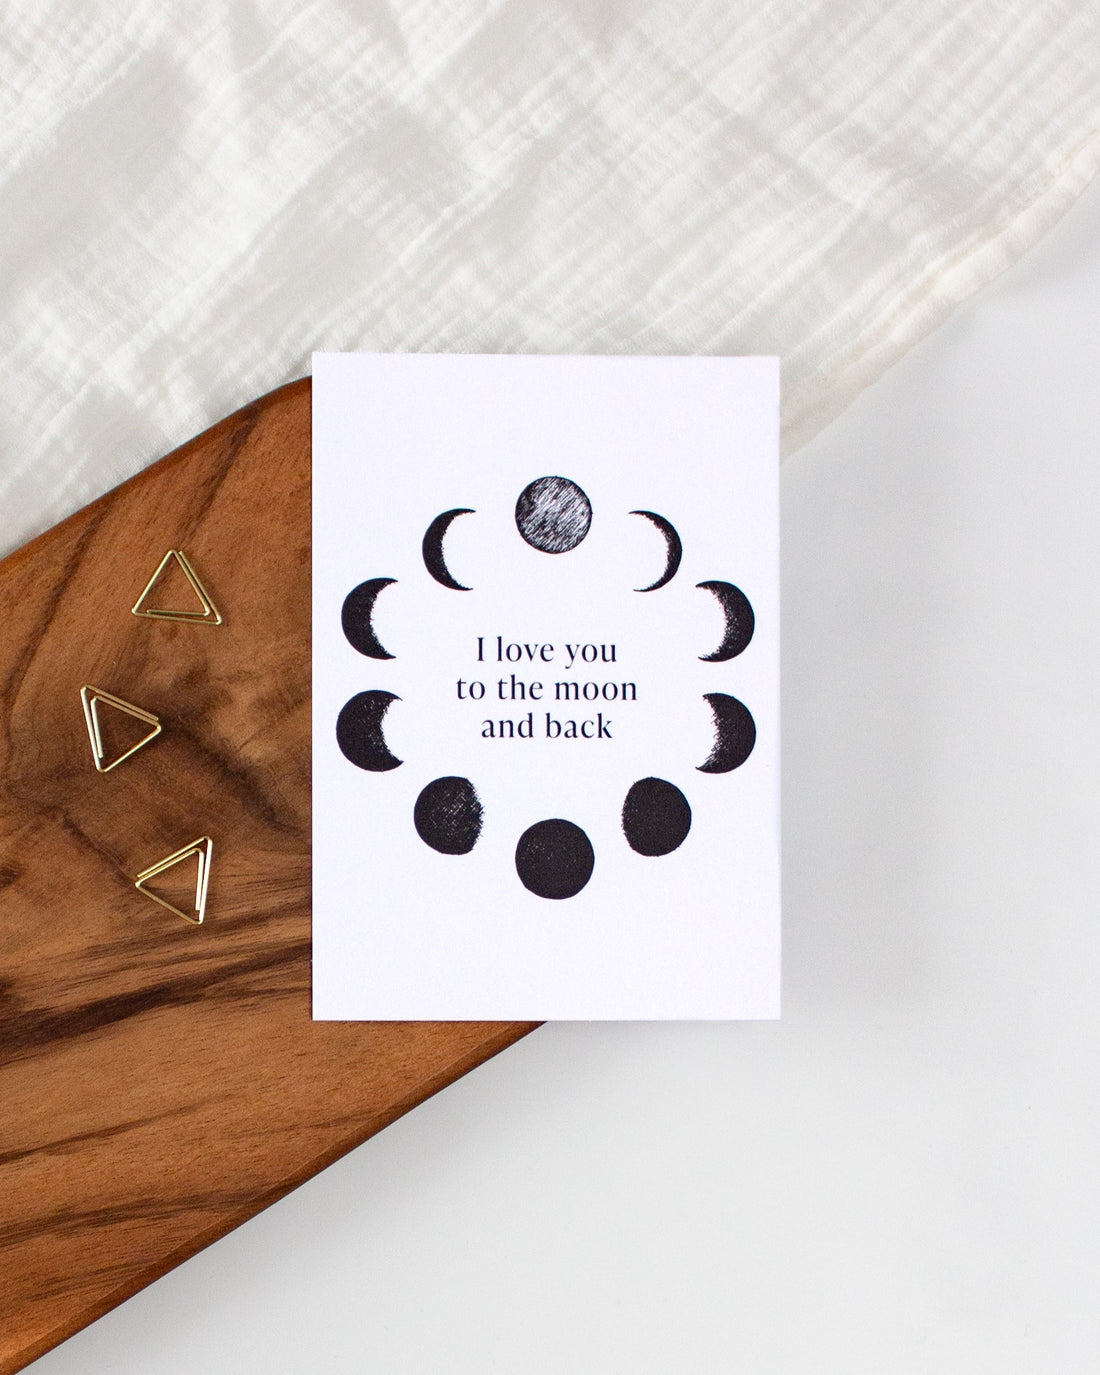 A white postcard laying on a wooden board with some golden triangle paperclips and a white cloth in the background.. The postcard design shows black sketches of moon phases arranged in a circle with some text in the middle saying &quot;I love you to the moon and back&quot;.